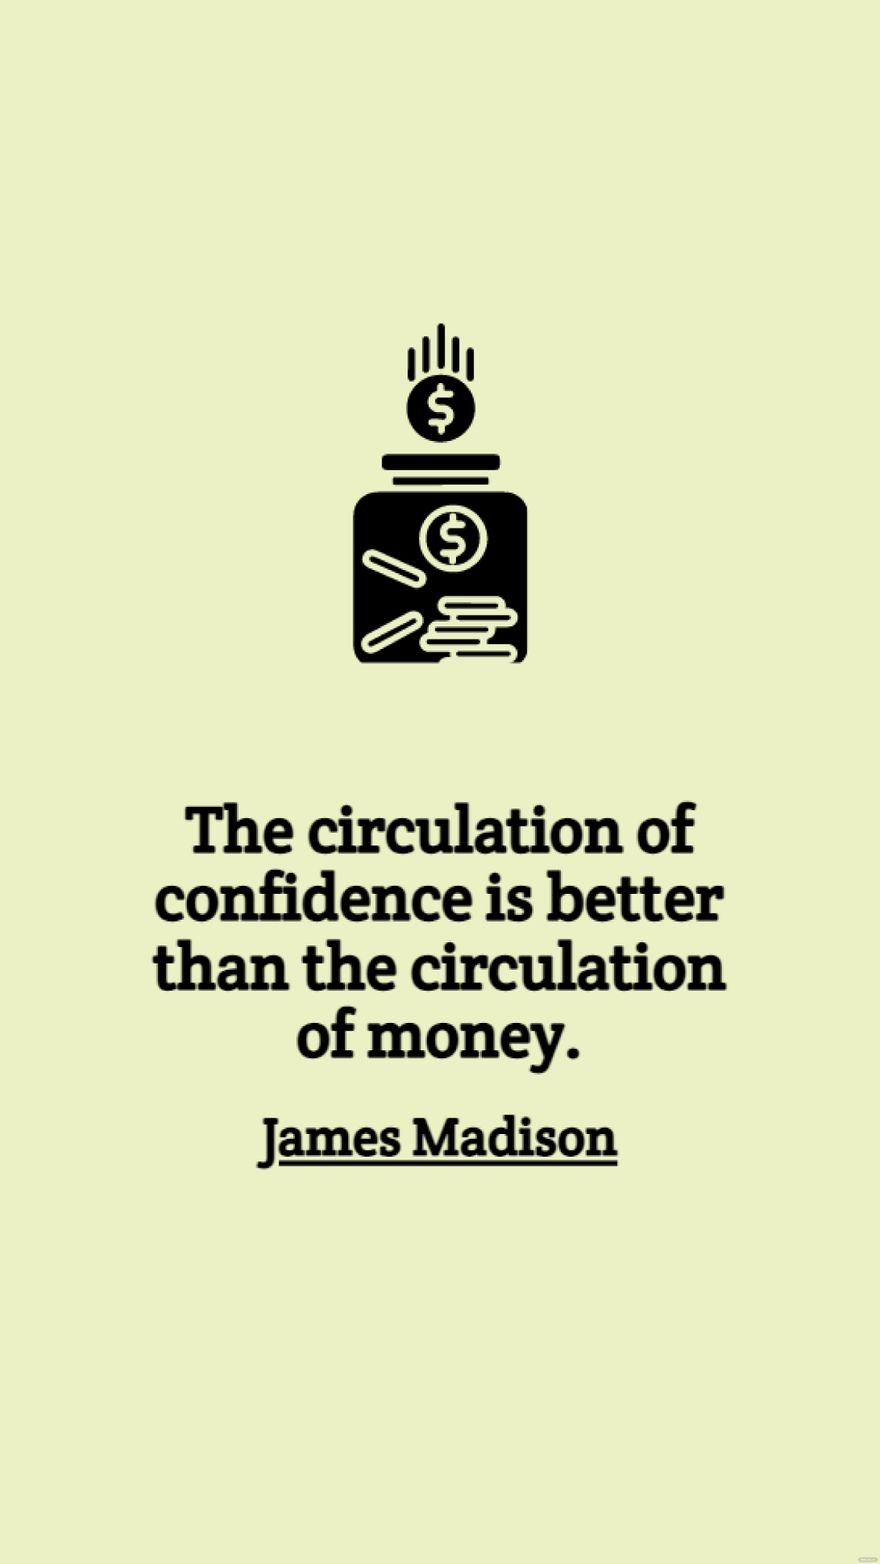 Free James Madison - The circulation of confidence is better than the circulation of money. in JPG